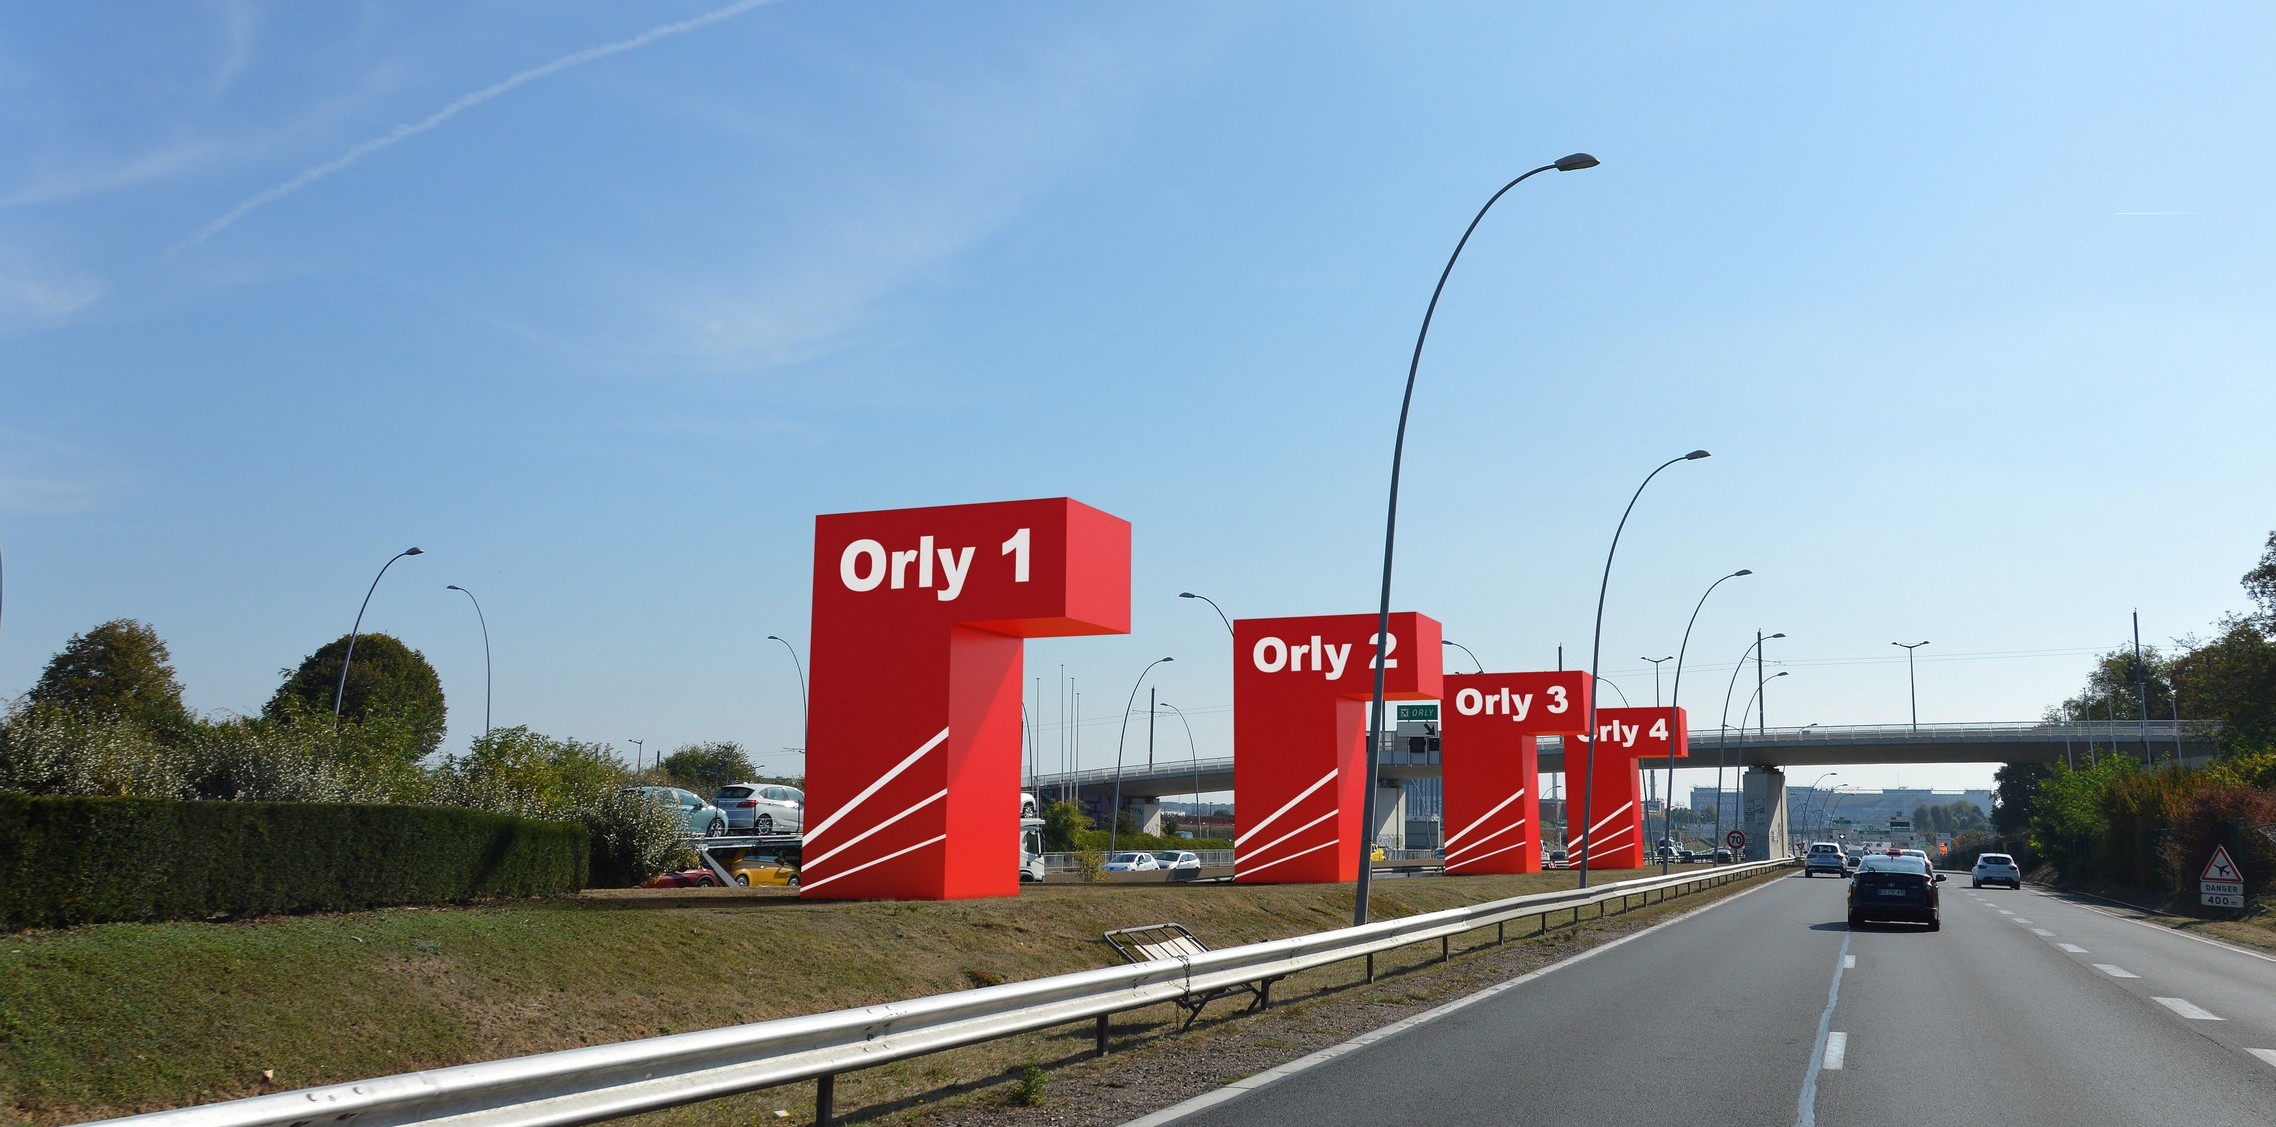 Orly Sud, Orly Ouest, c'est fini.<br />
Bienvenue ORLY 1-2-3-4 !